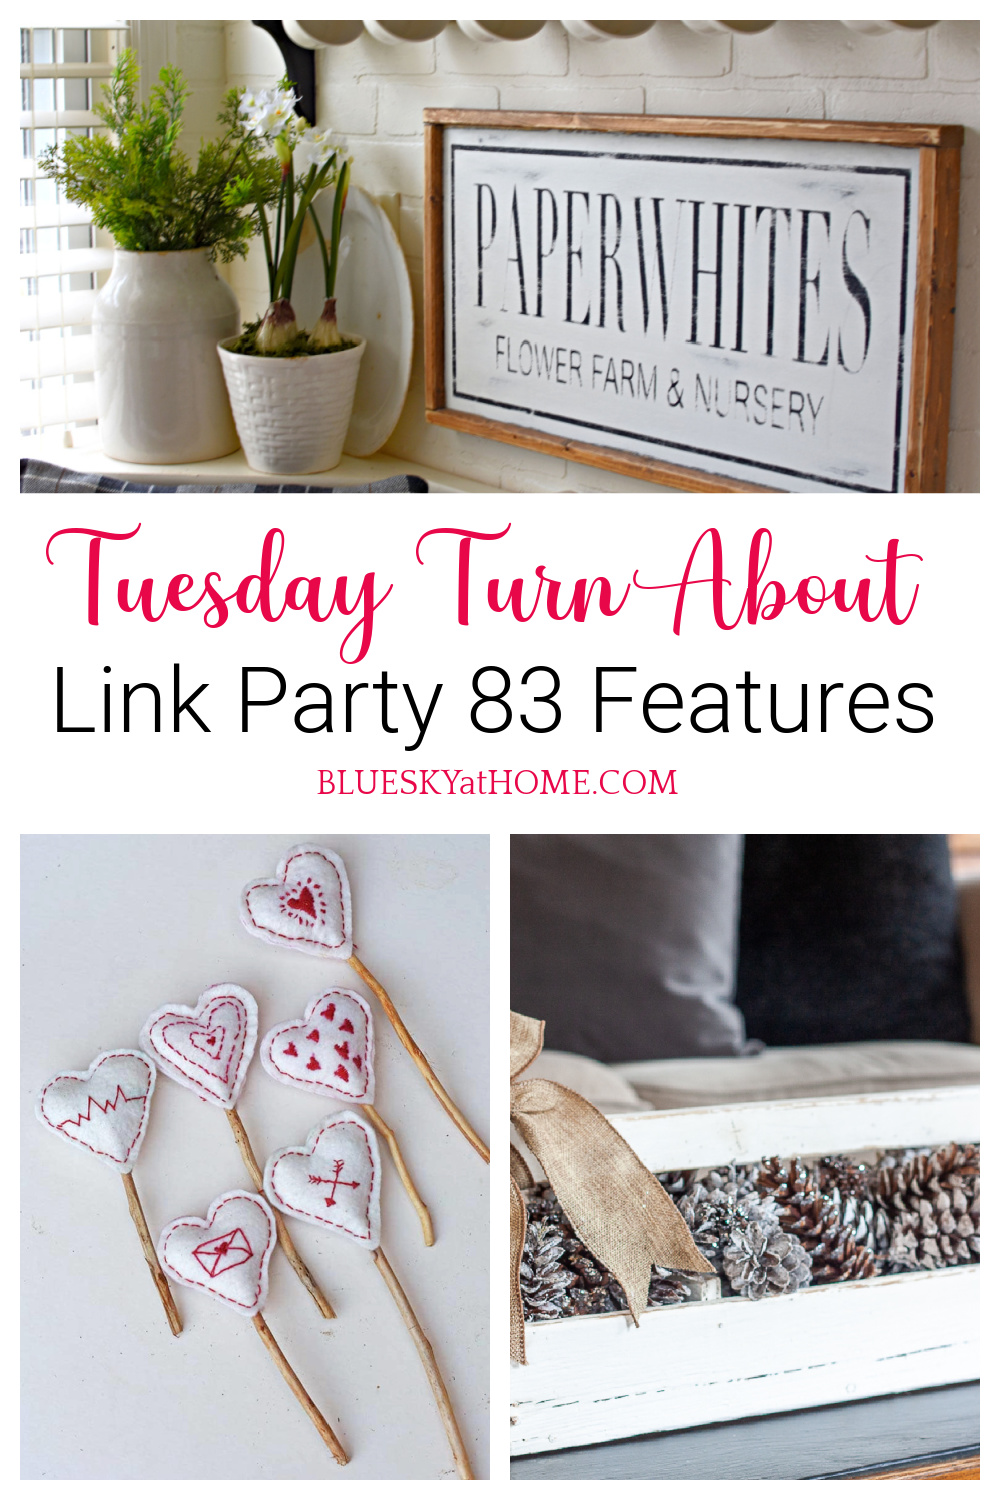 Tuesday Turn About Link Party 83